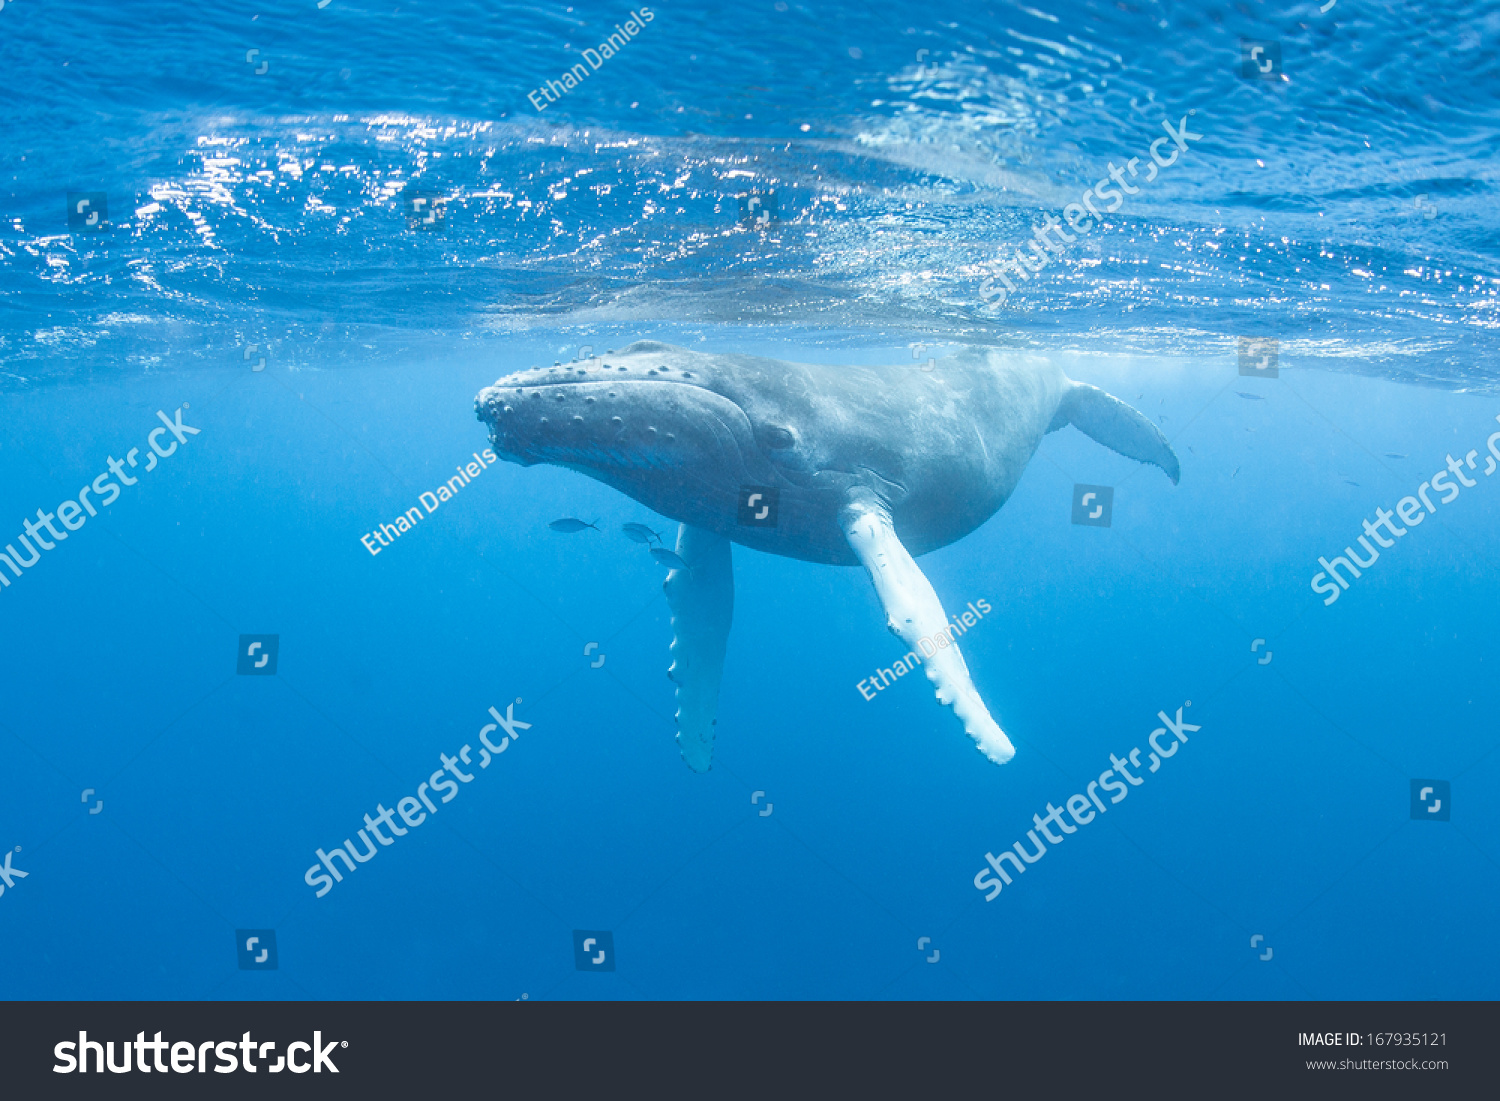 A young Humpback whale (Megaptera novaeangliae) swims at the surface of the Caribbean Sea, near where it was born. The calf will soon migrate north with its mother to feeding grounds off New England. #167935121